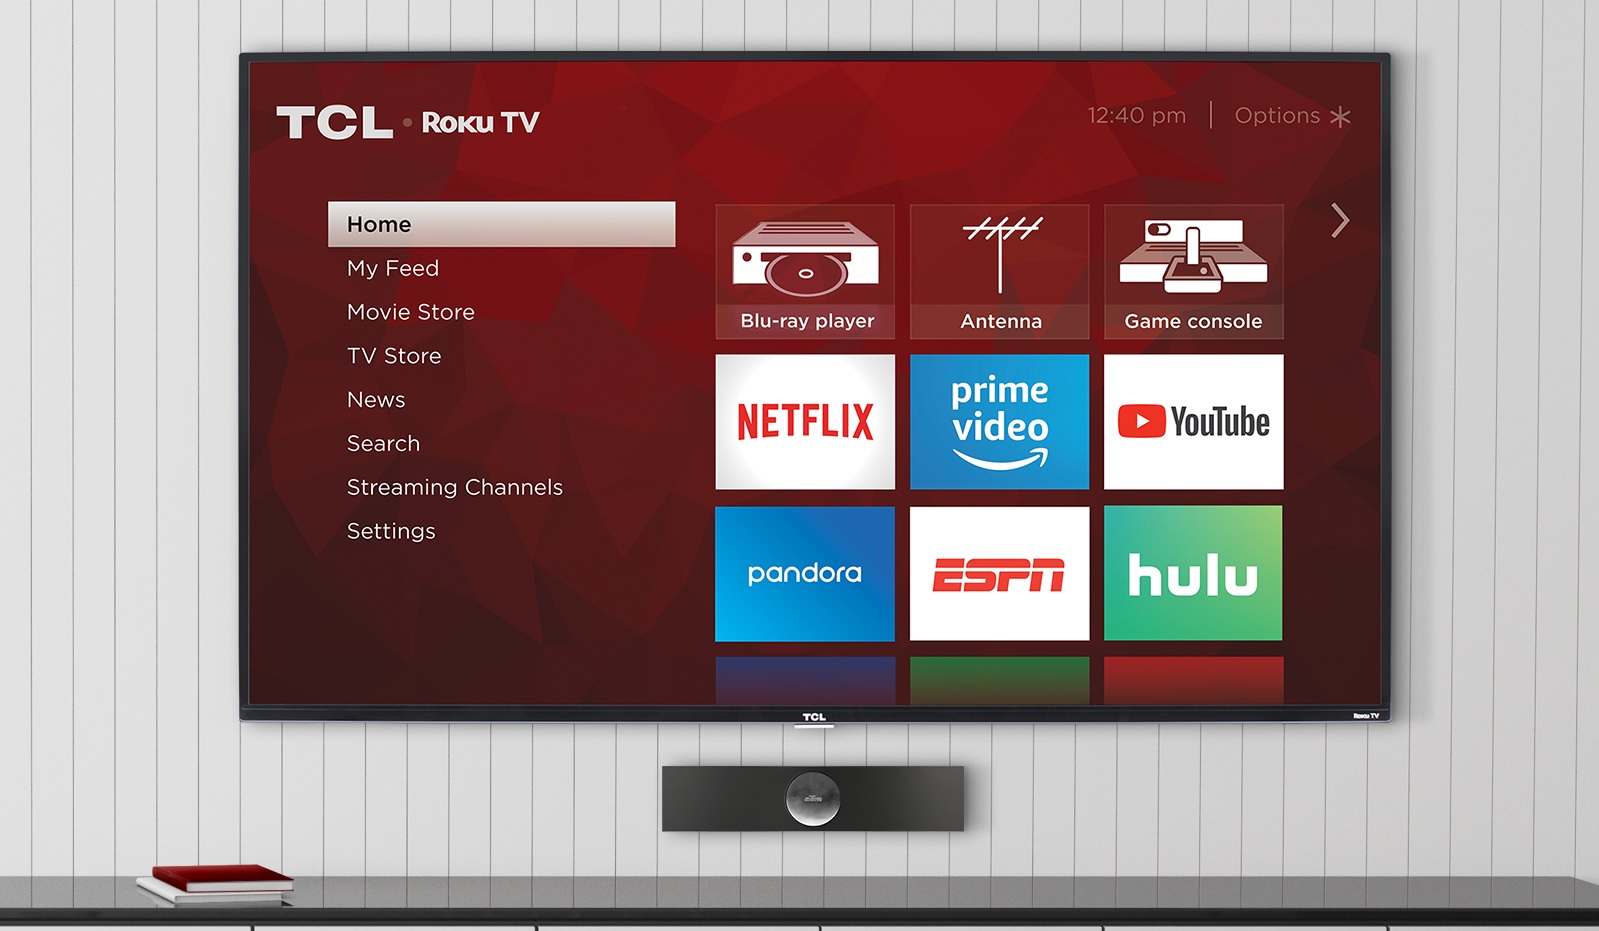 PlayStation Vue Updates its Roku Channel to Address Bugs From Its Last Update